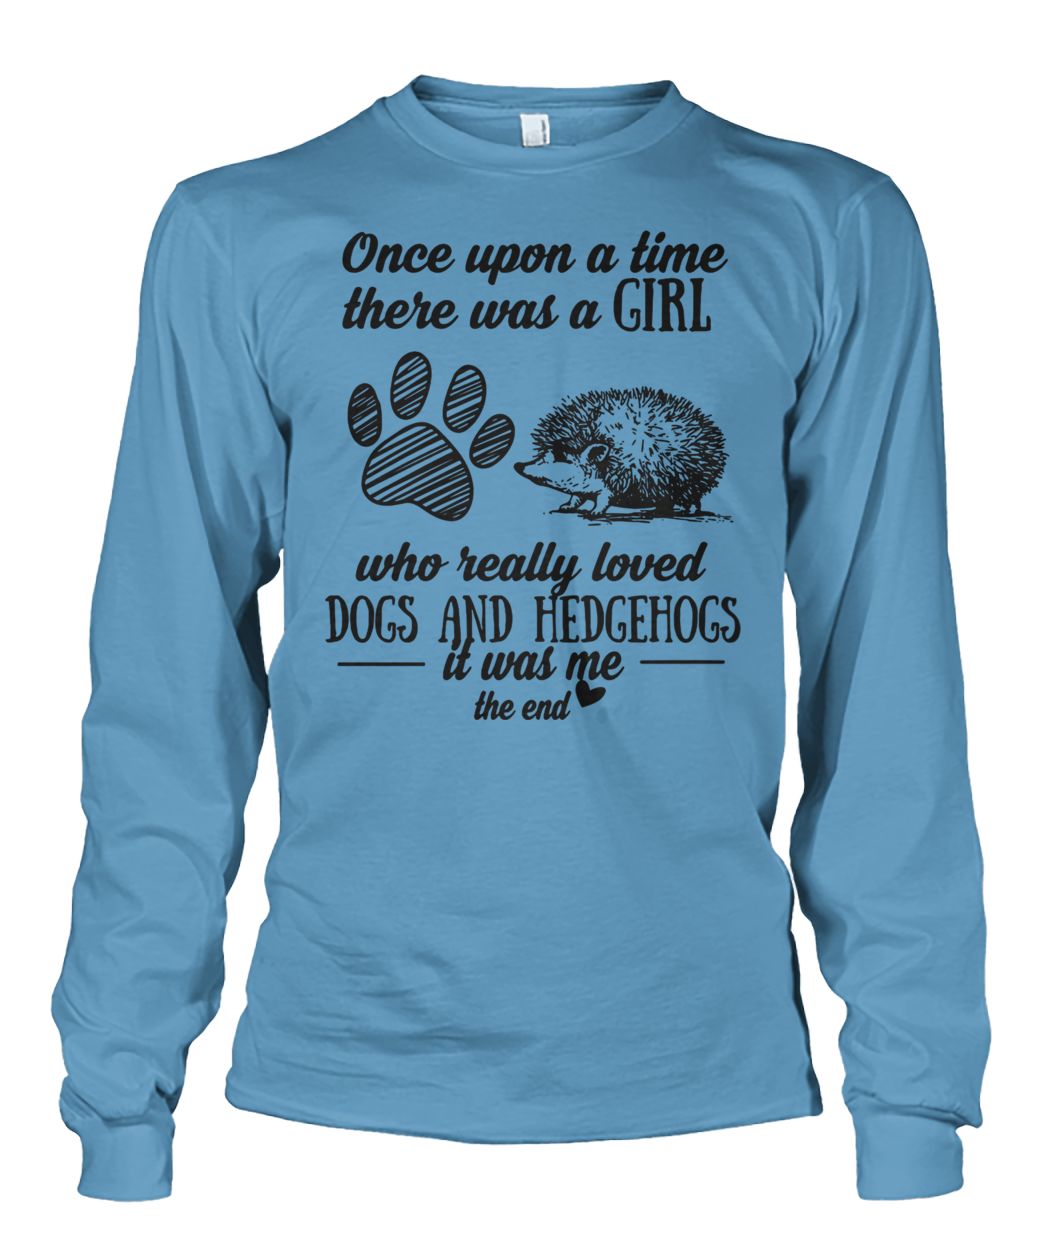 Once upon a time there was a girl who really loved dogs and hedgehogs it was me unisex long sleeve